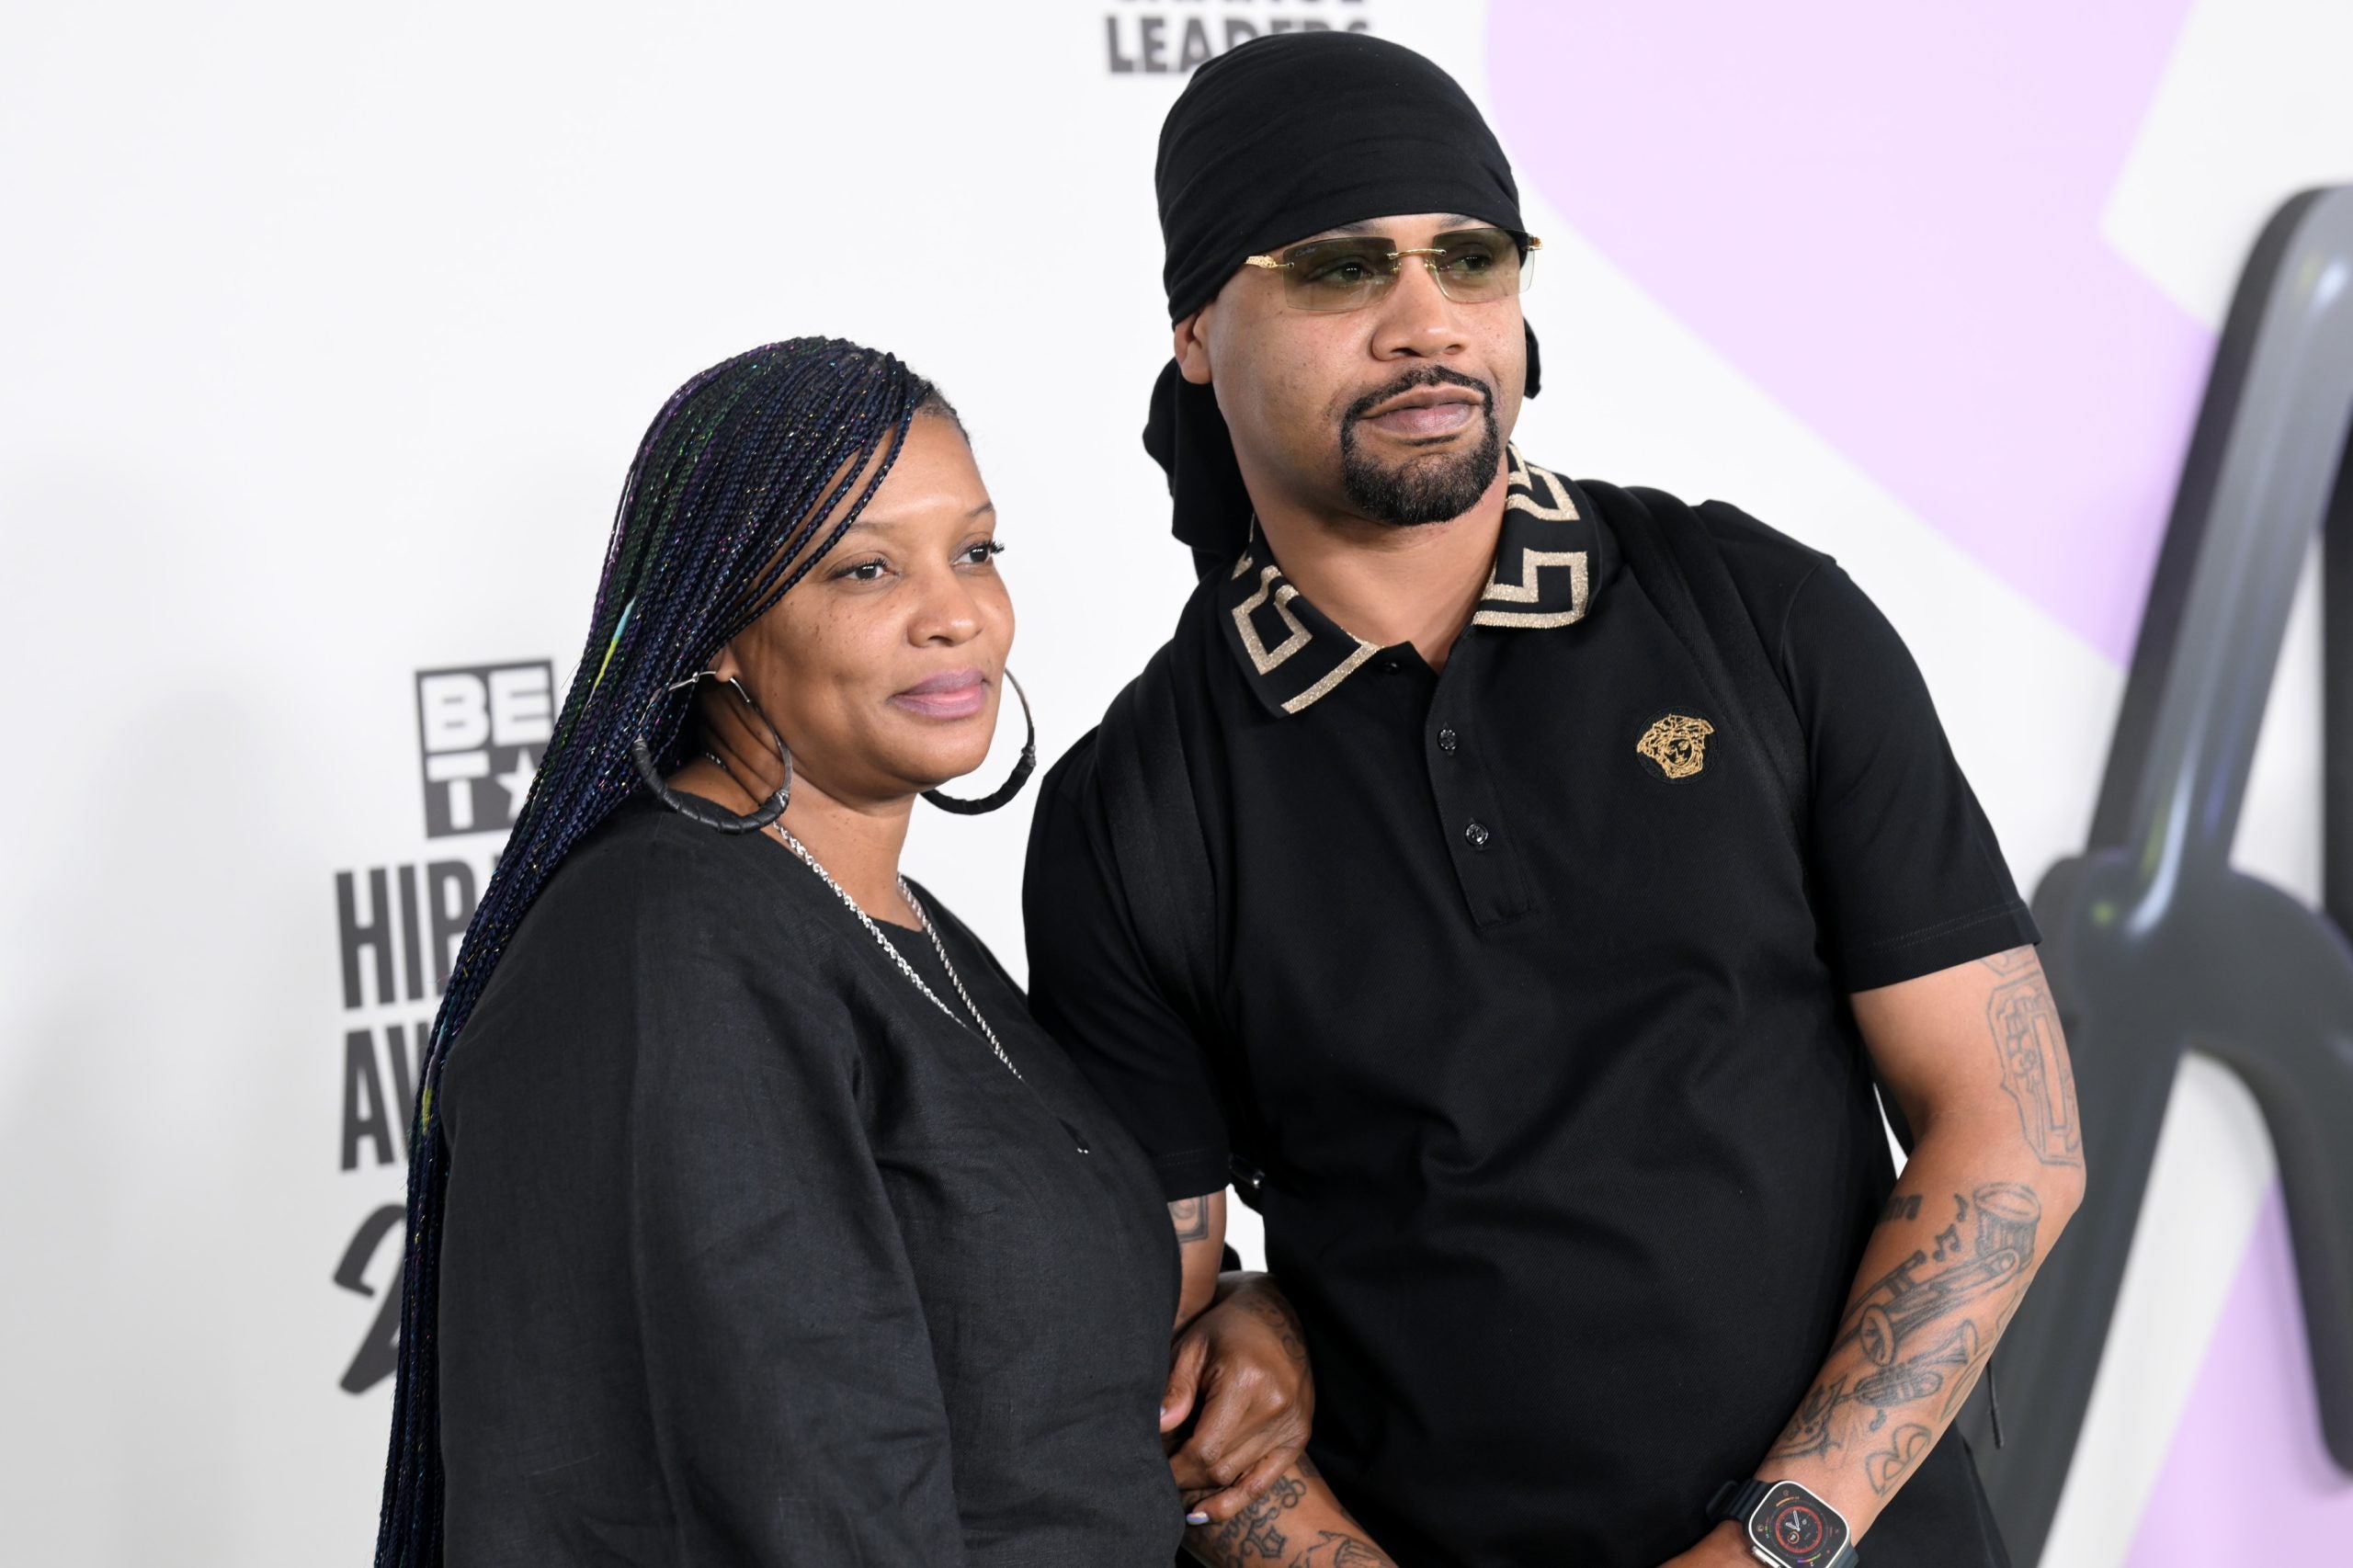 Here’s All The Cute Couples And Families Spotted At The 2023 BET Hip Hop Awards